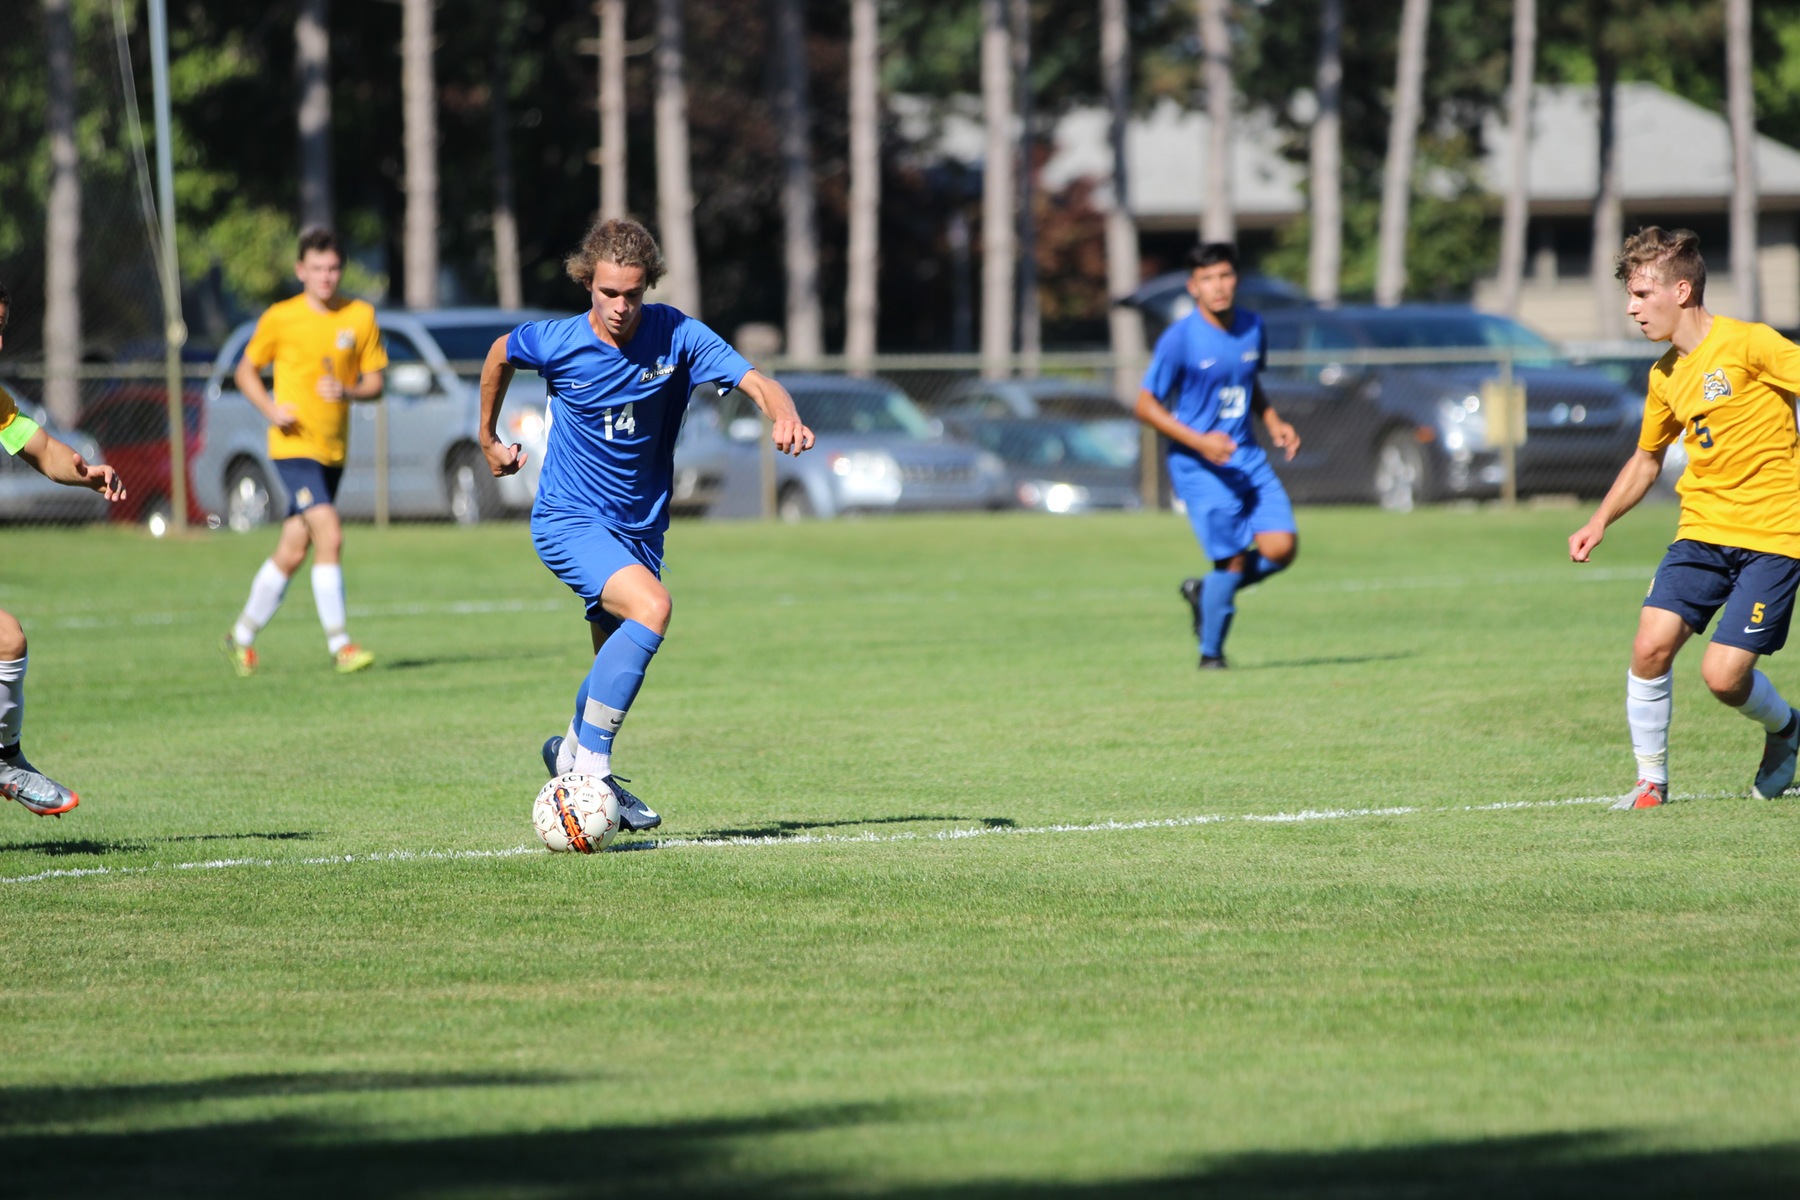 Muskegon CC men's soccer player advances the ball up the field.